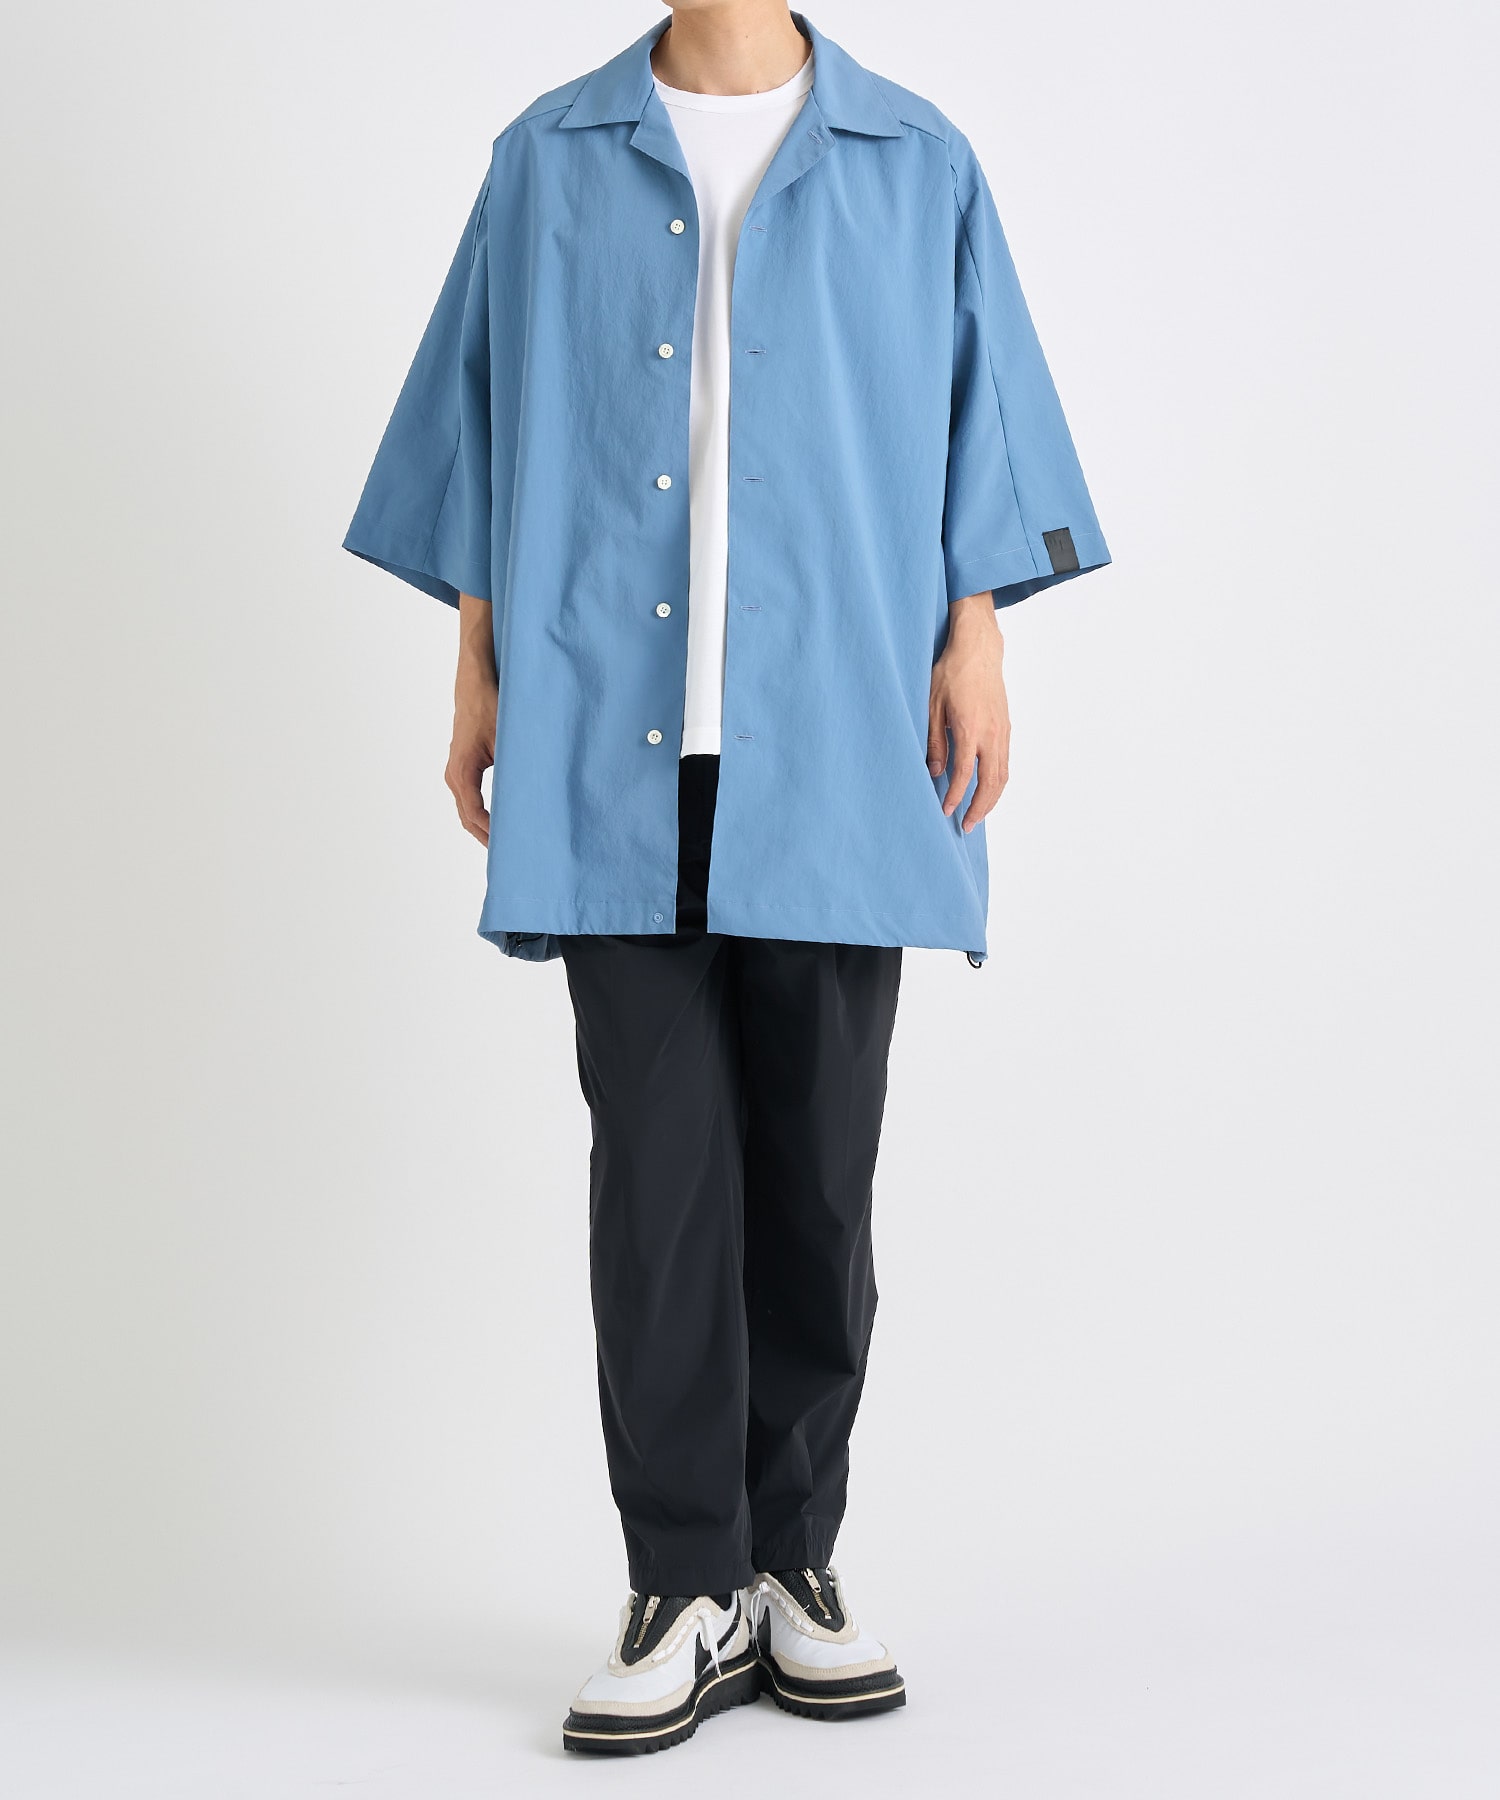 Open Collar Over Size S/S SH PE N.HOOLYWOOD